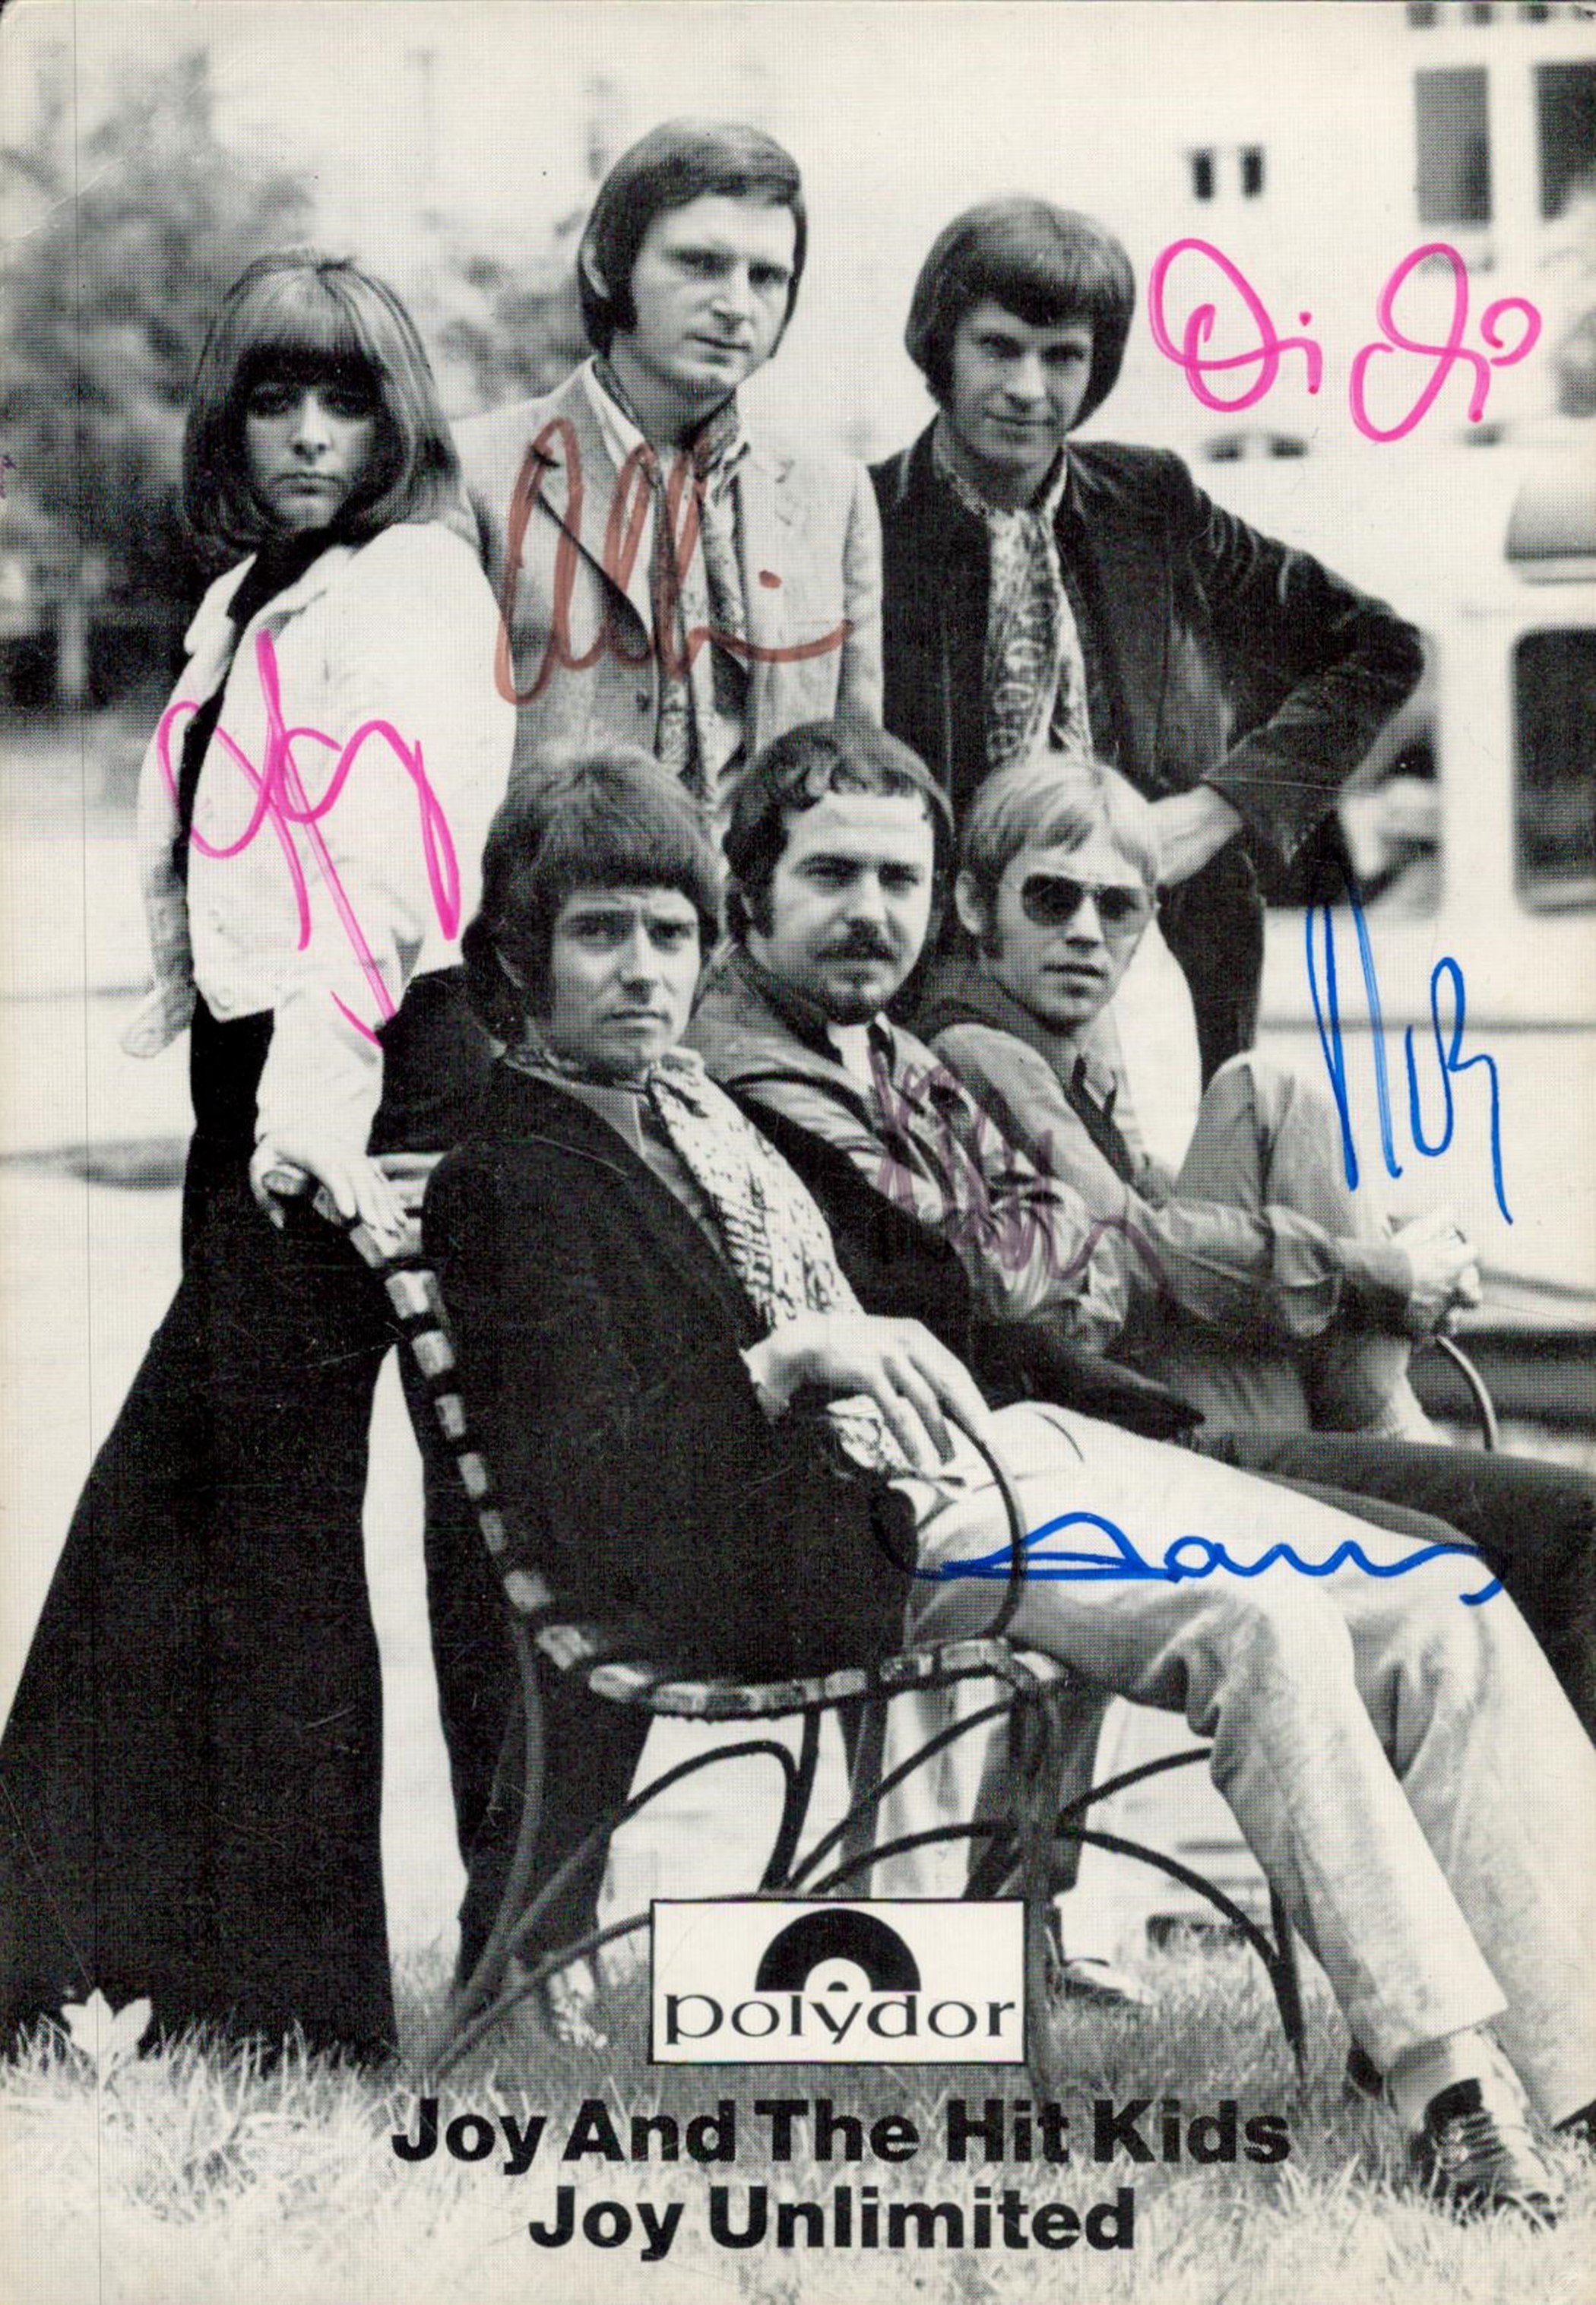 Music. Joy and the Hit Kids Joy Unlimited Multi Signed 6 x 4 inch Black and White Promo Photo.